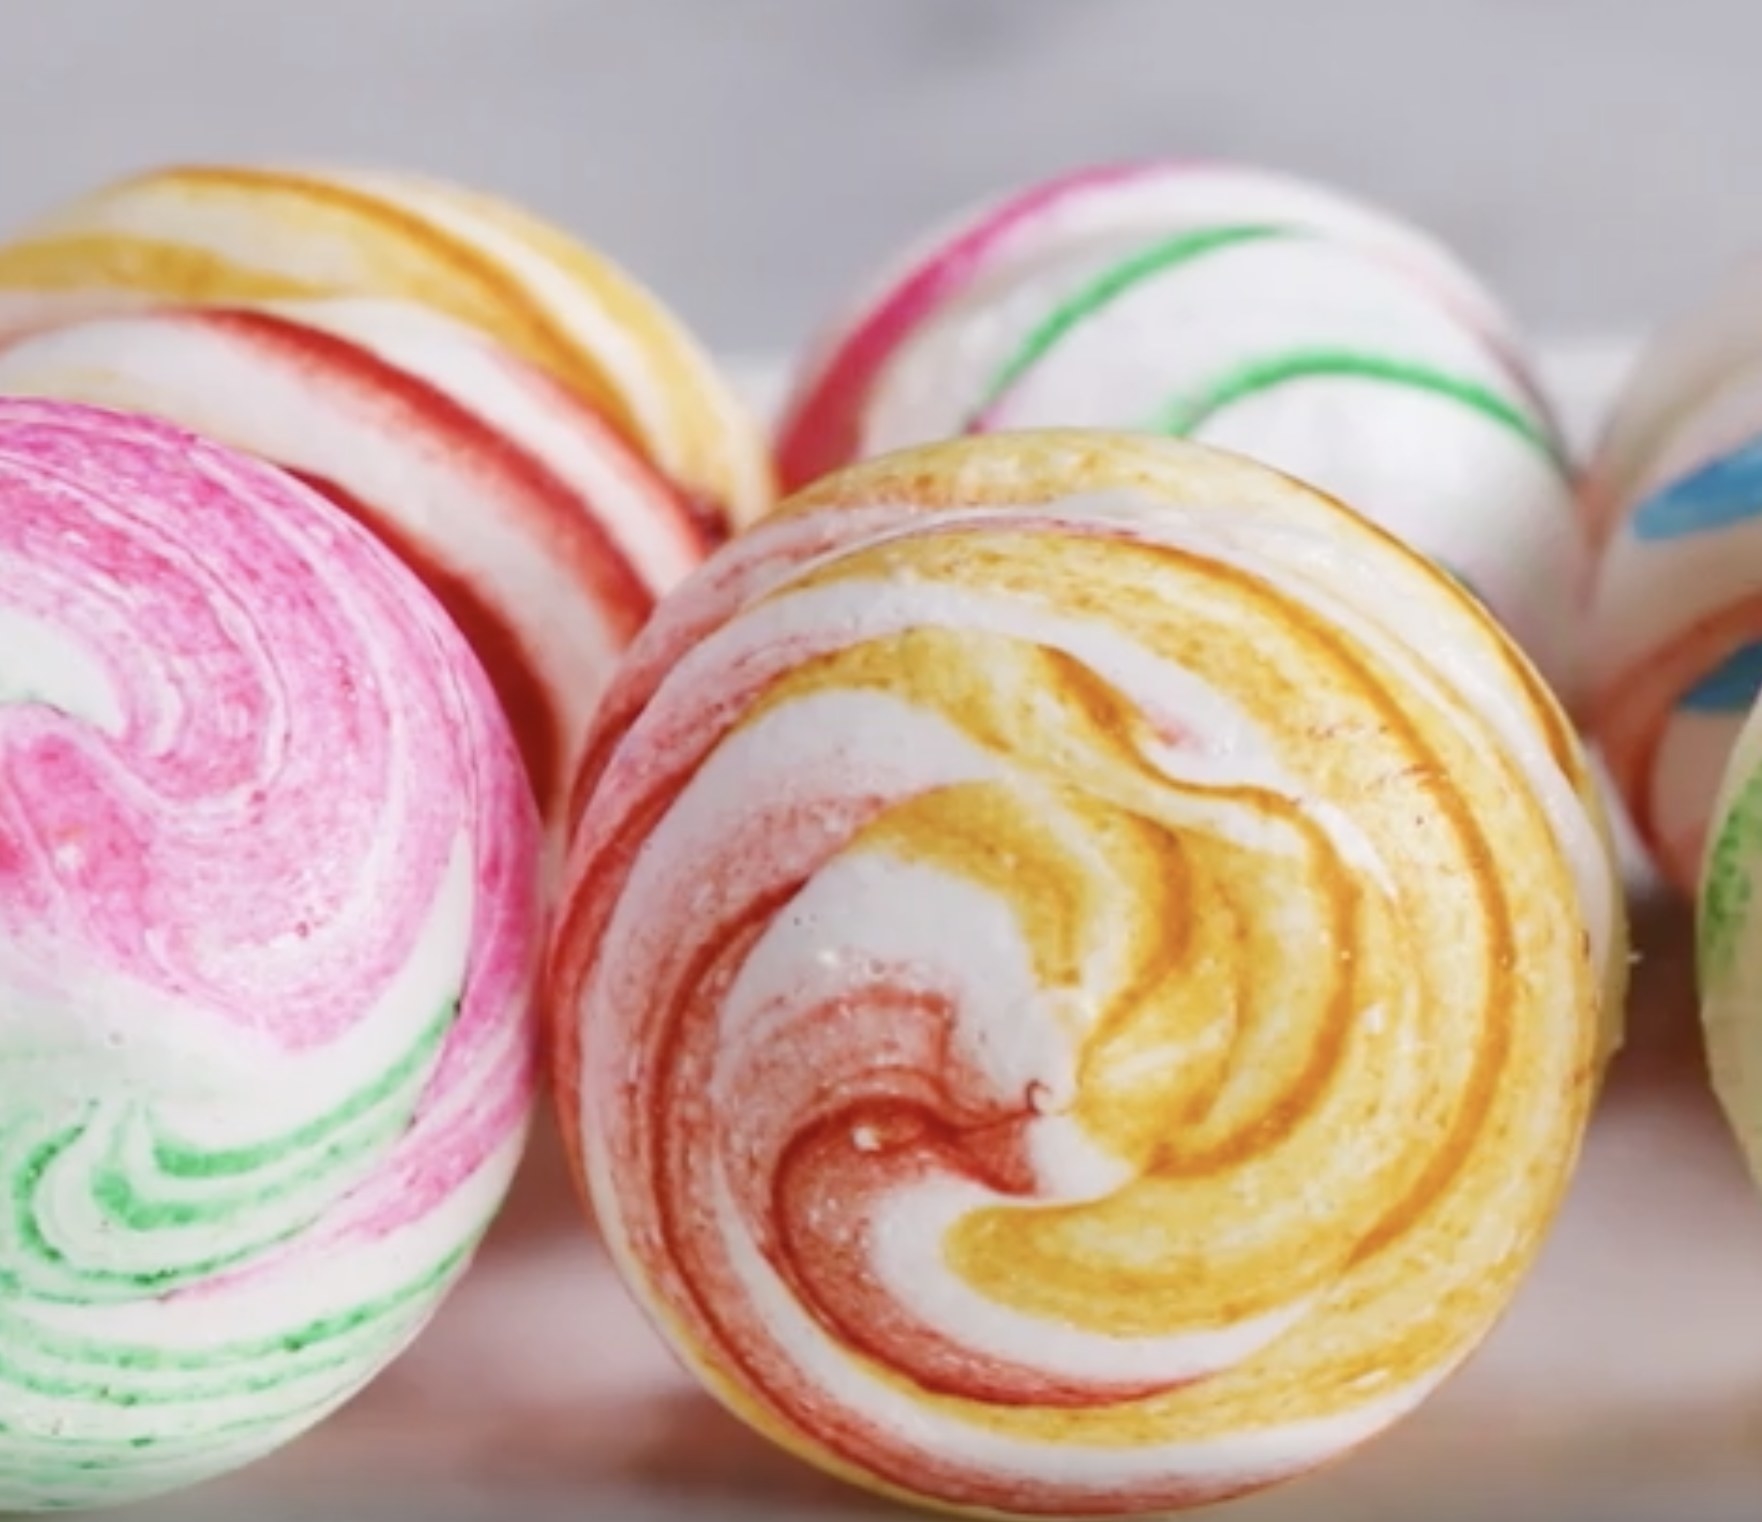 The meringues in different colored swirls